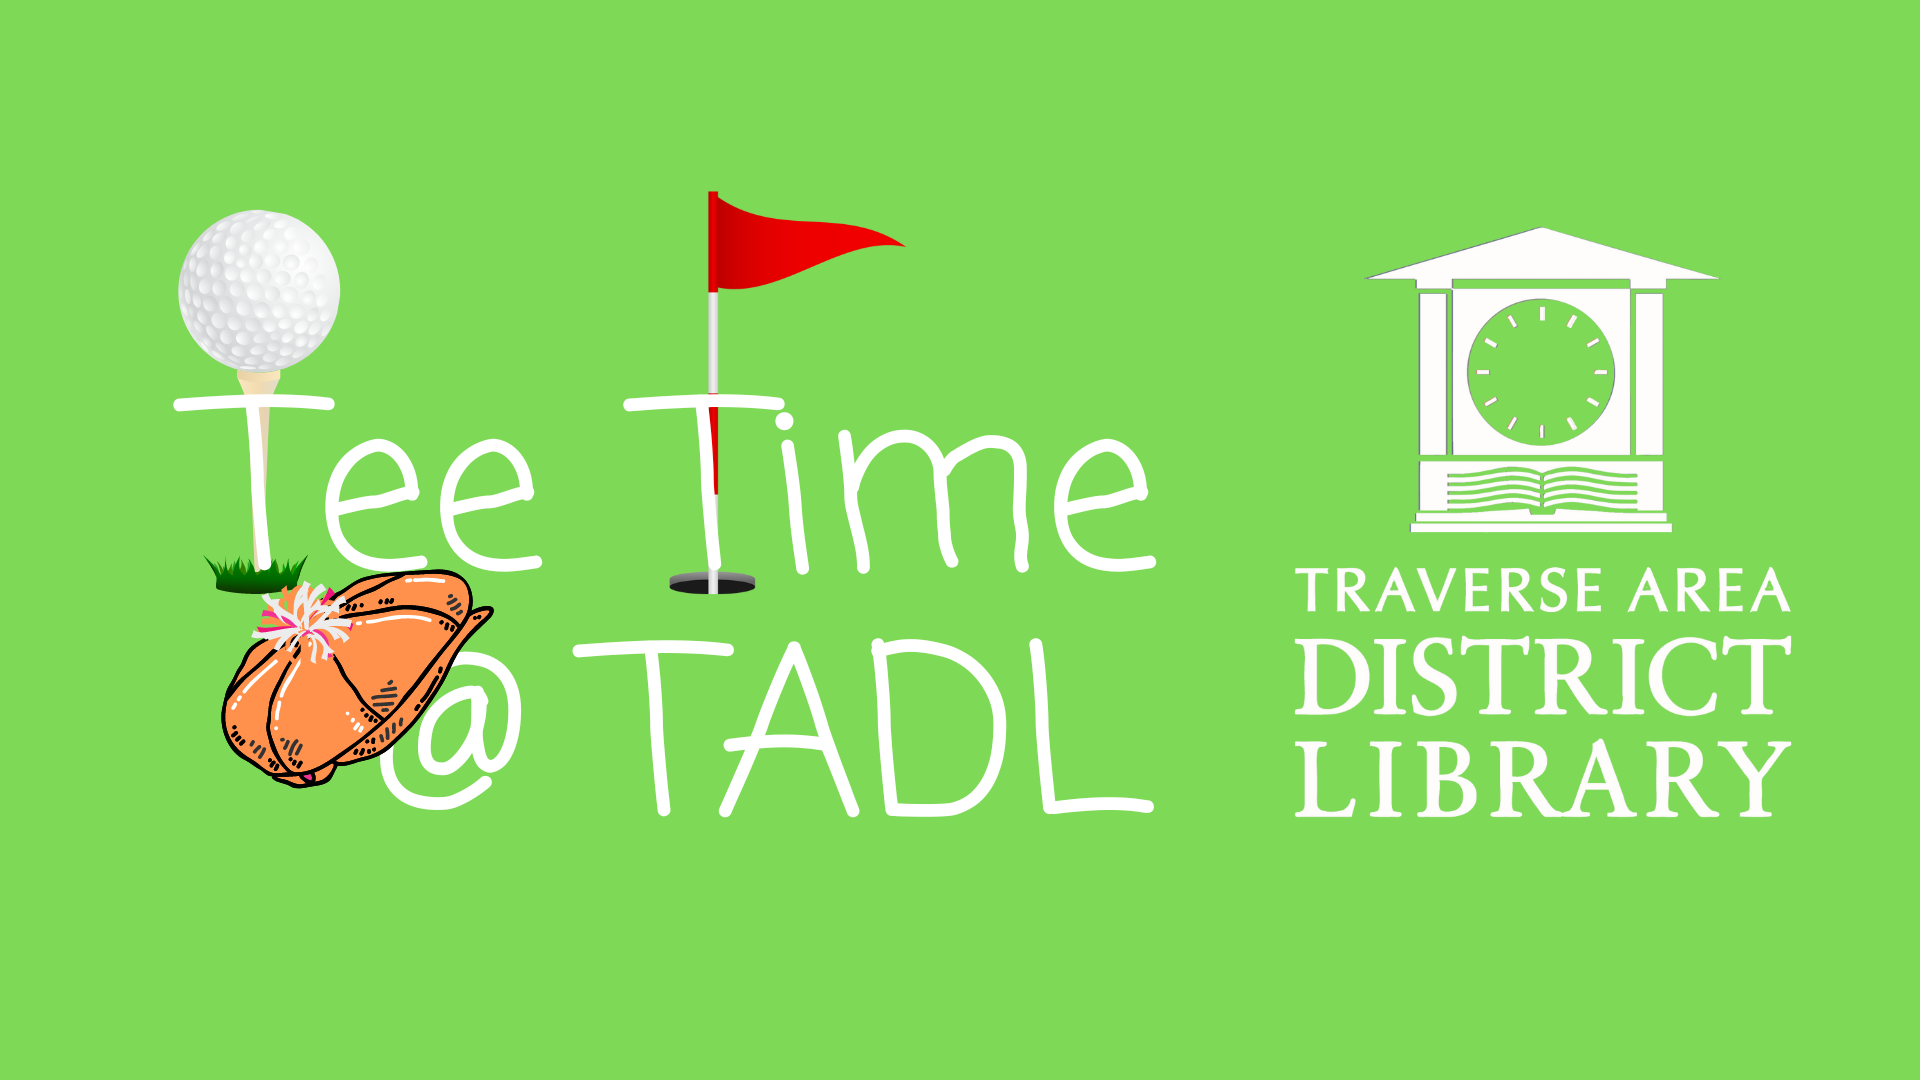 Golf ball flag and hat in title of Tee Time at TADL